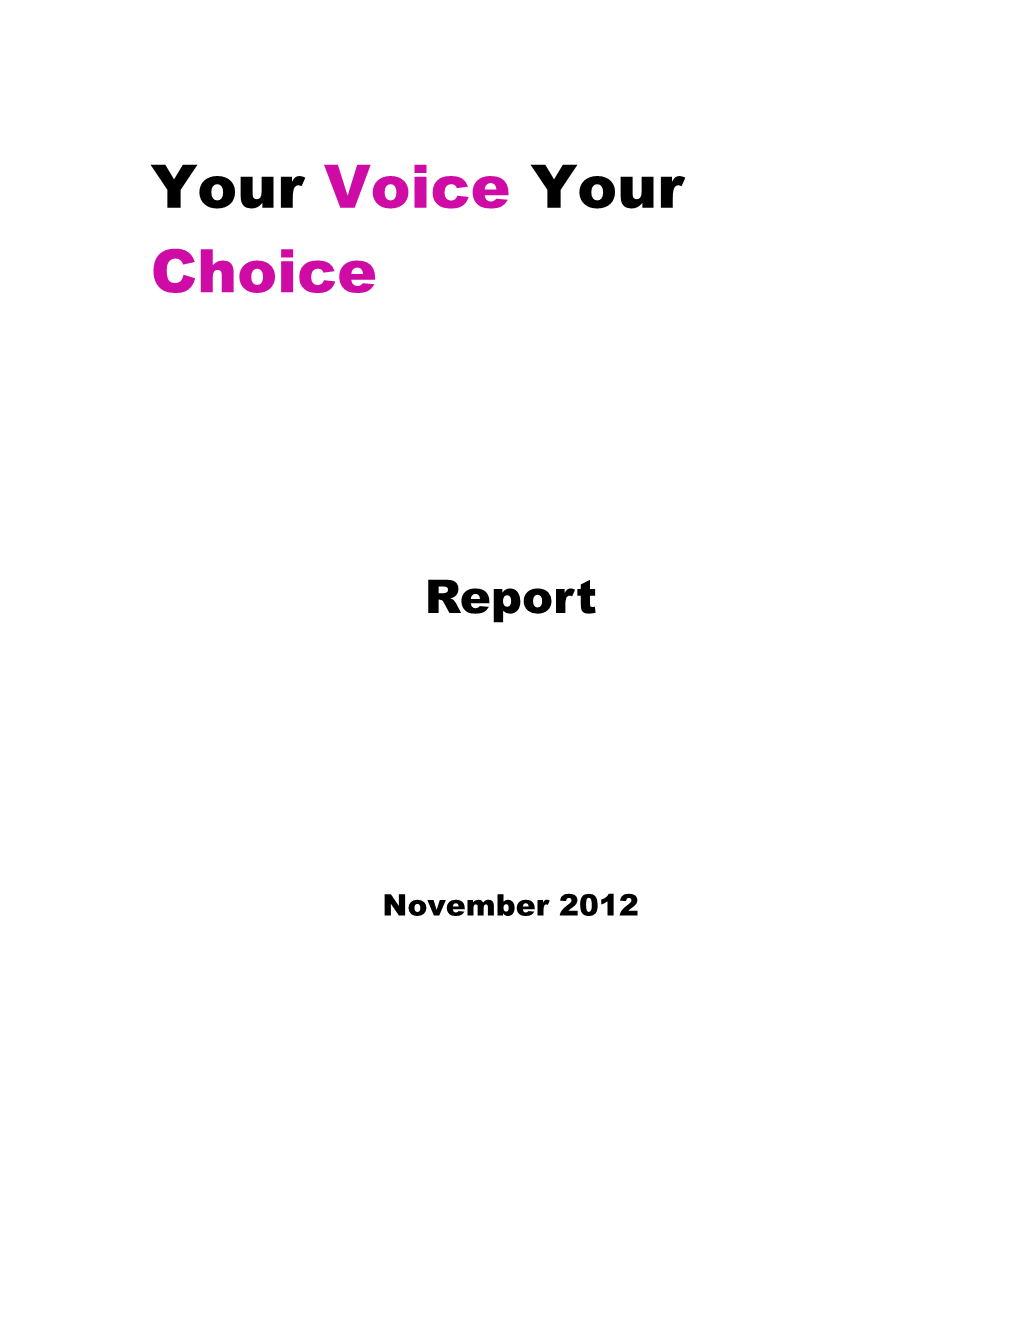 Your Voice Your Choice